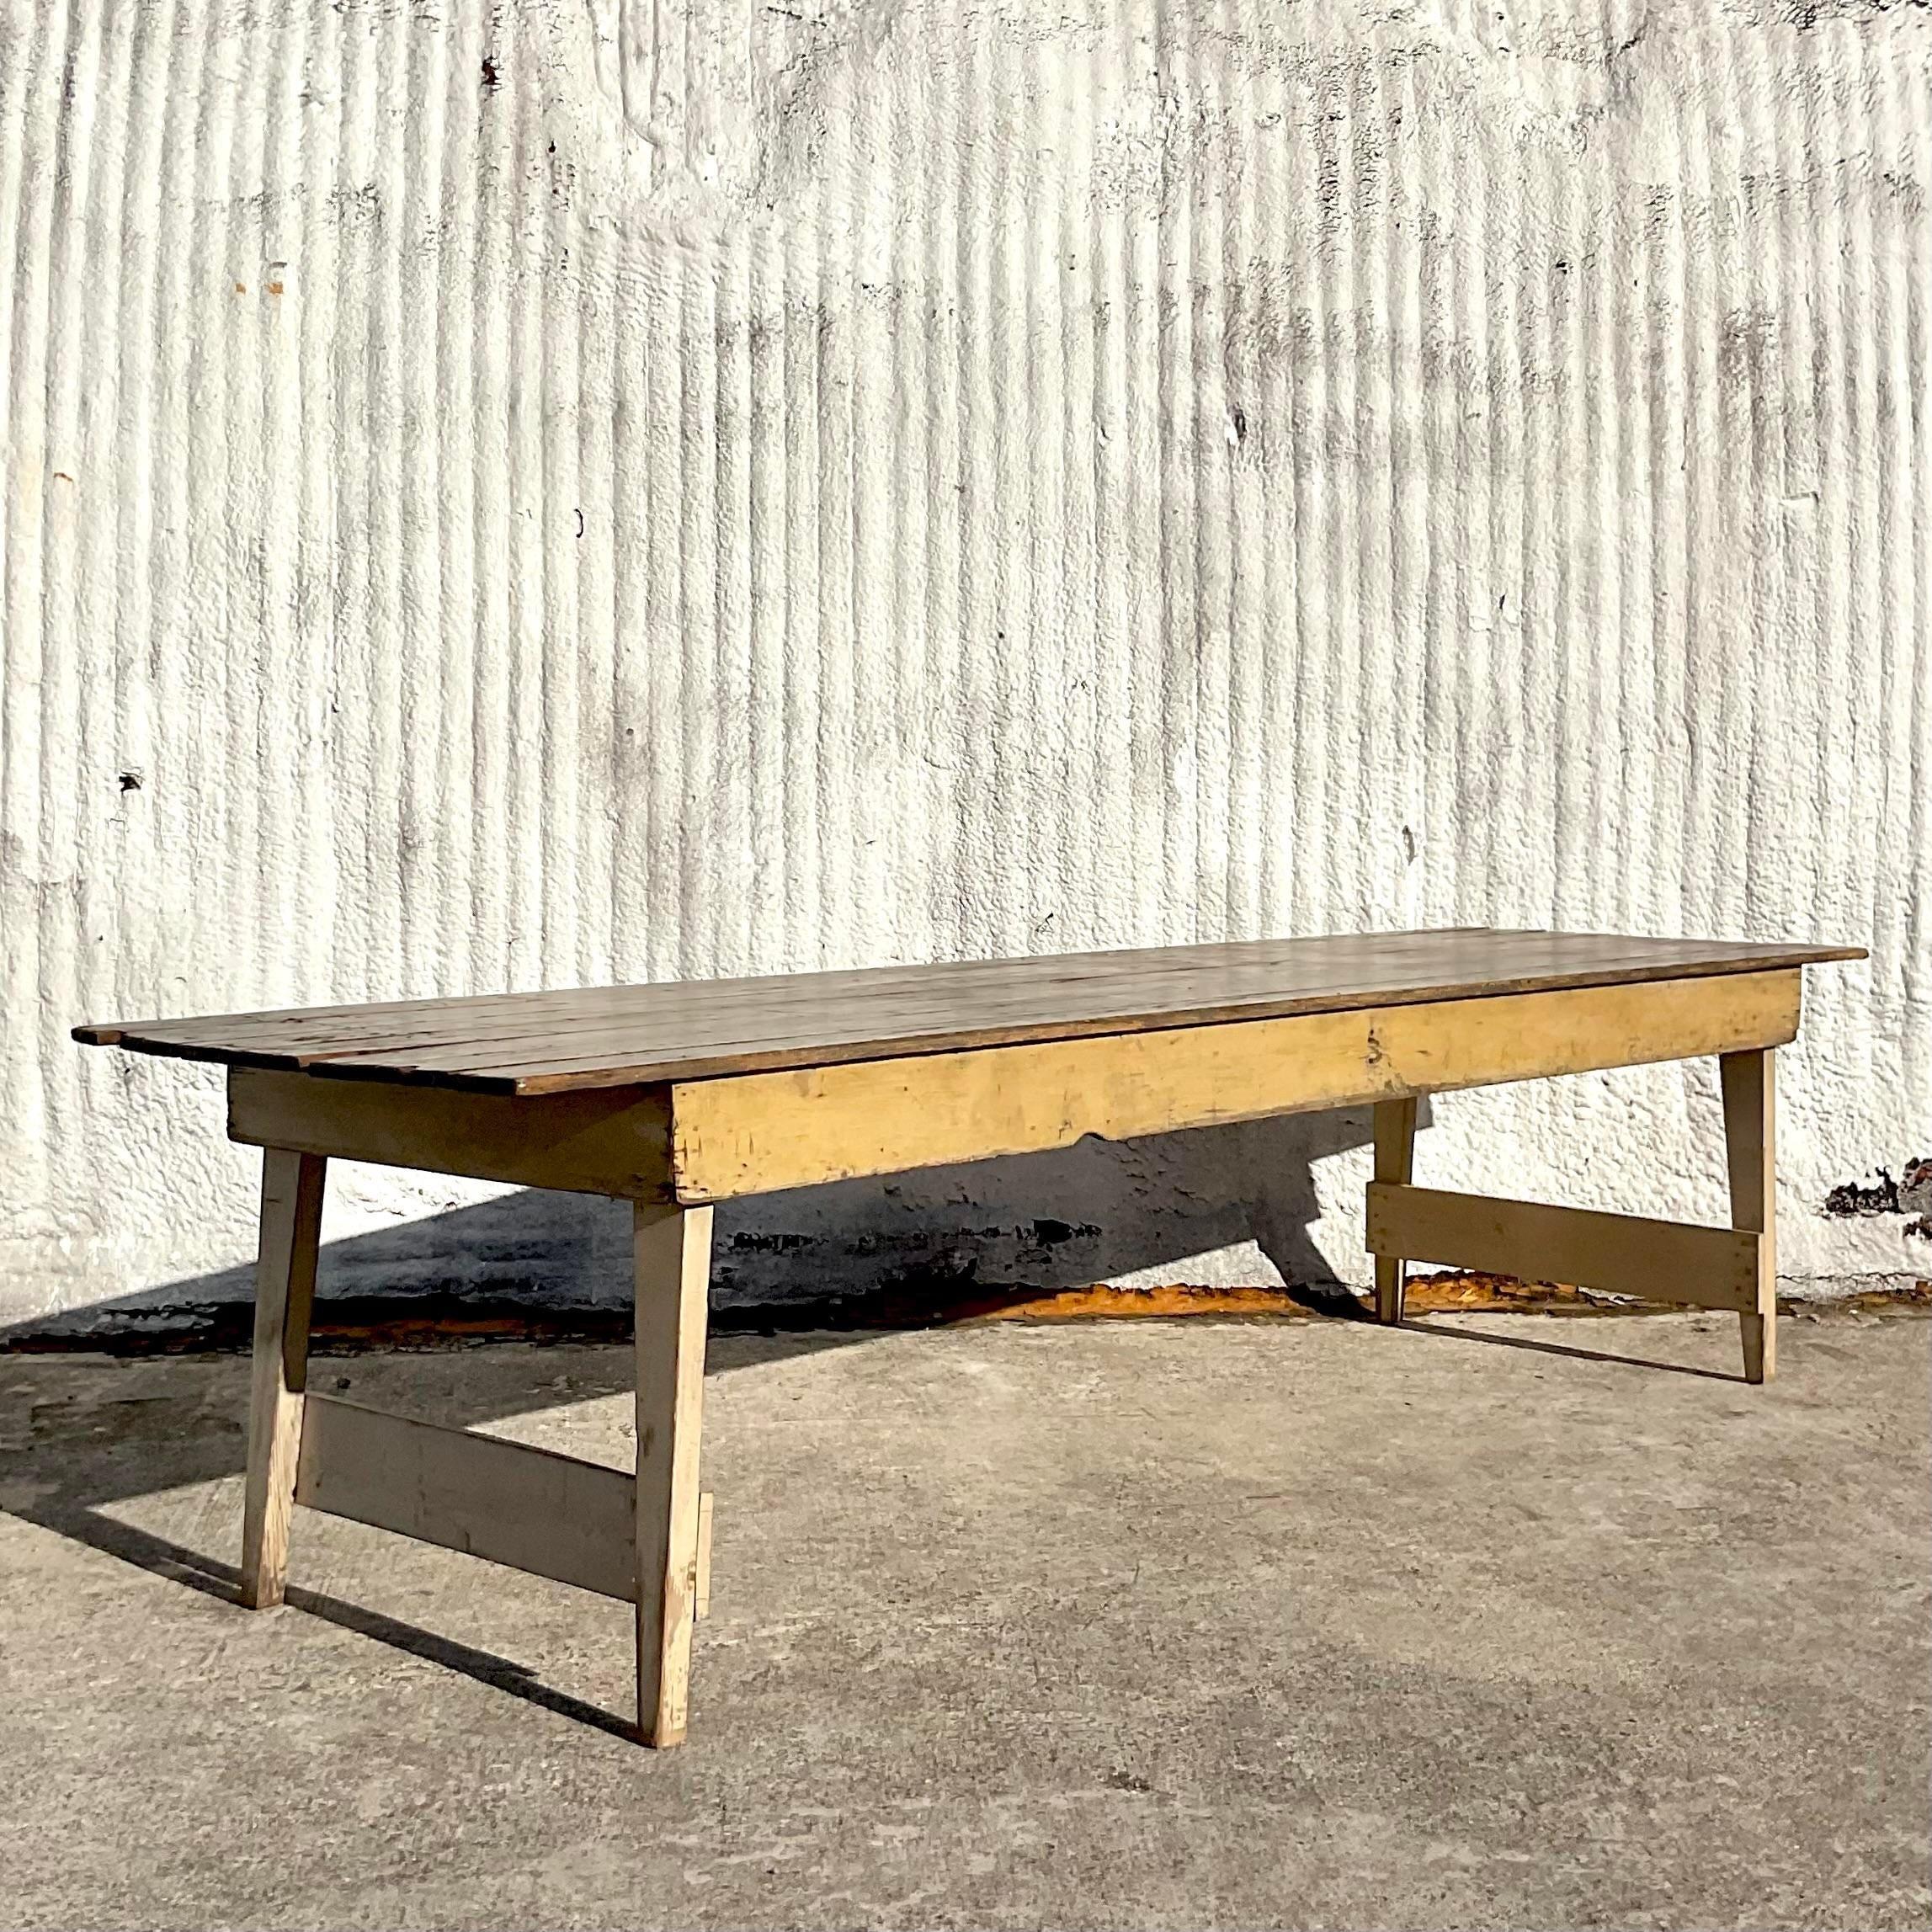 An exceptional vintage Harvest farm table. Gorgeous hand chamfered plank top with distressed apron and splayed legs. Monumental in size and drama. 10 coordinating chairs also available on my page. Acquired from a Historical Florida estate.